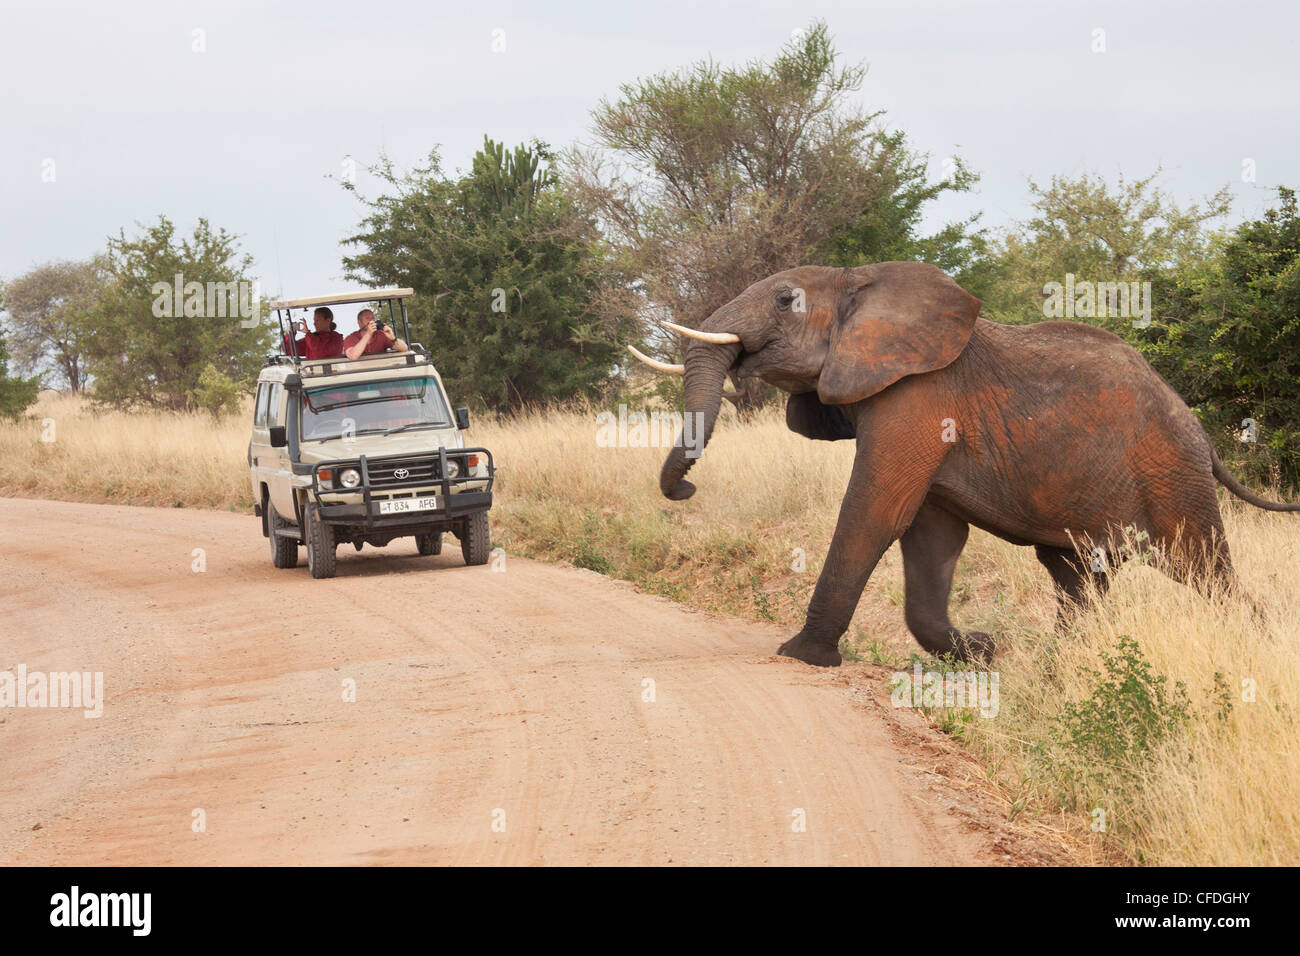 Elephant crossing road infront of jeep with tourists in Tanzania Stock Photo